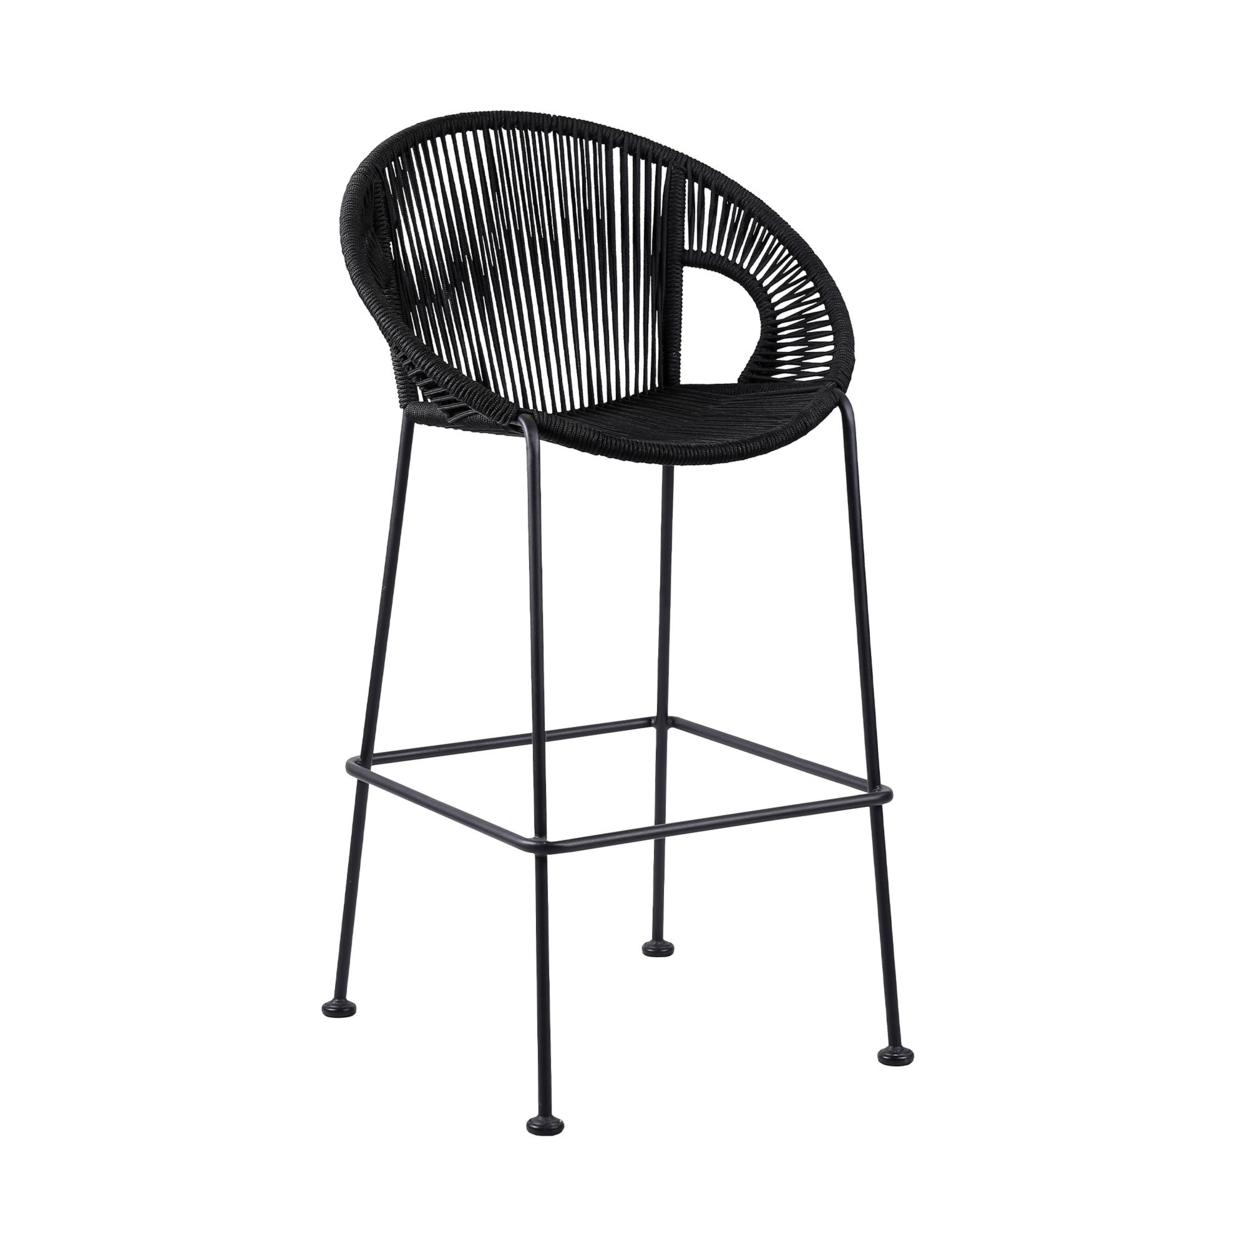 Indoor Outdoor Bar Stool With Rounded Rope Woven Seat, Black- Saltoro Sherpi